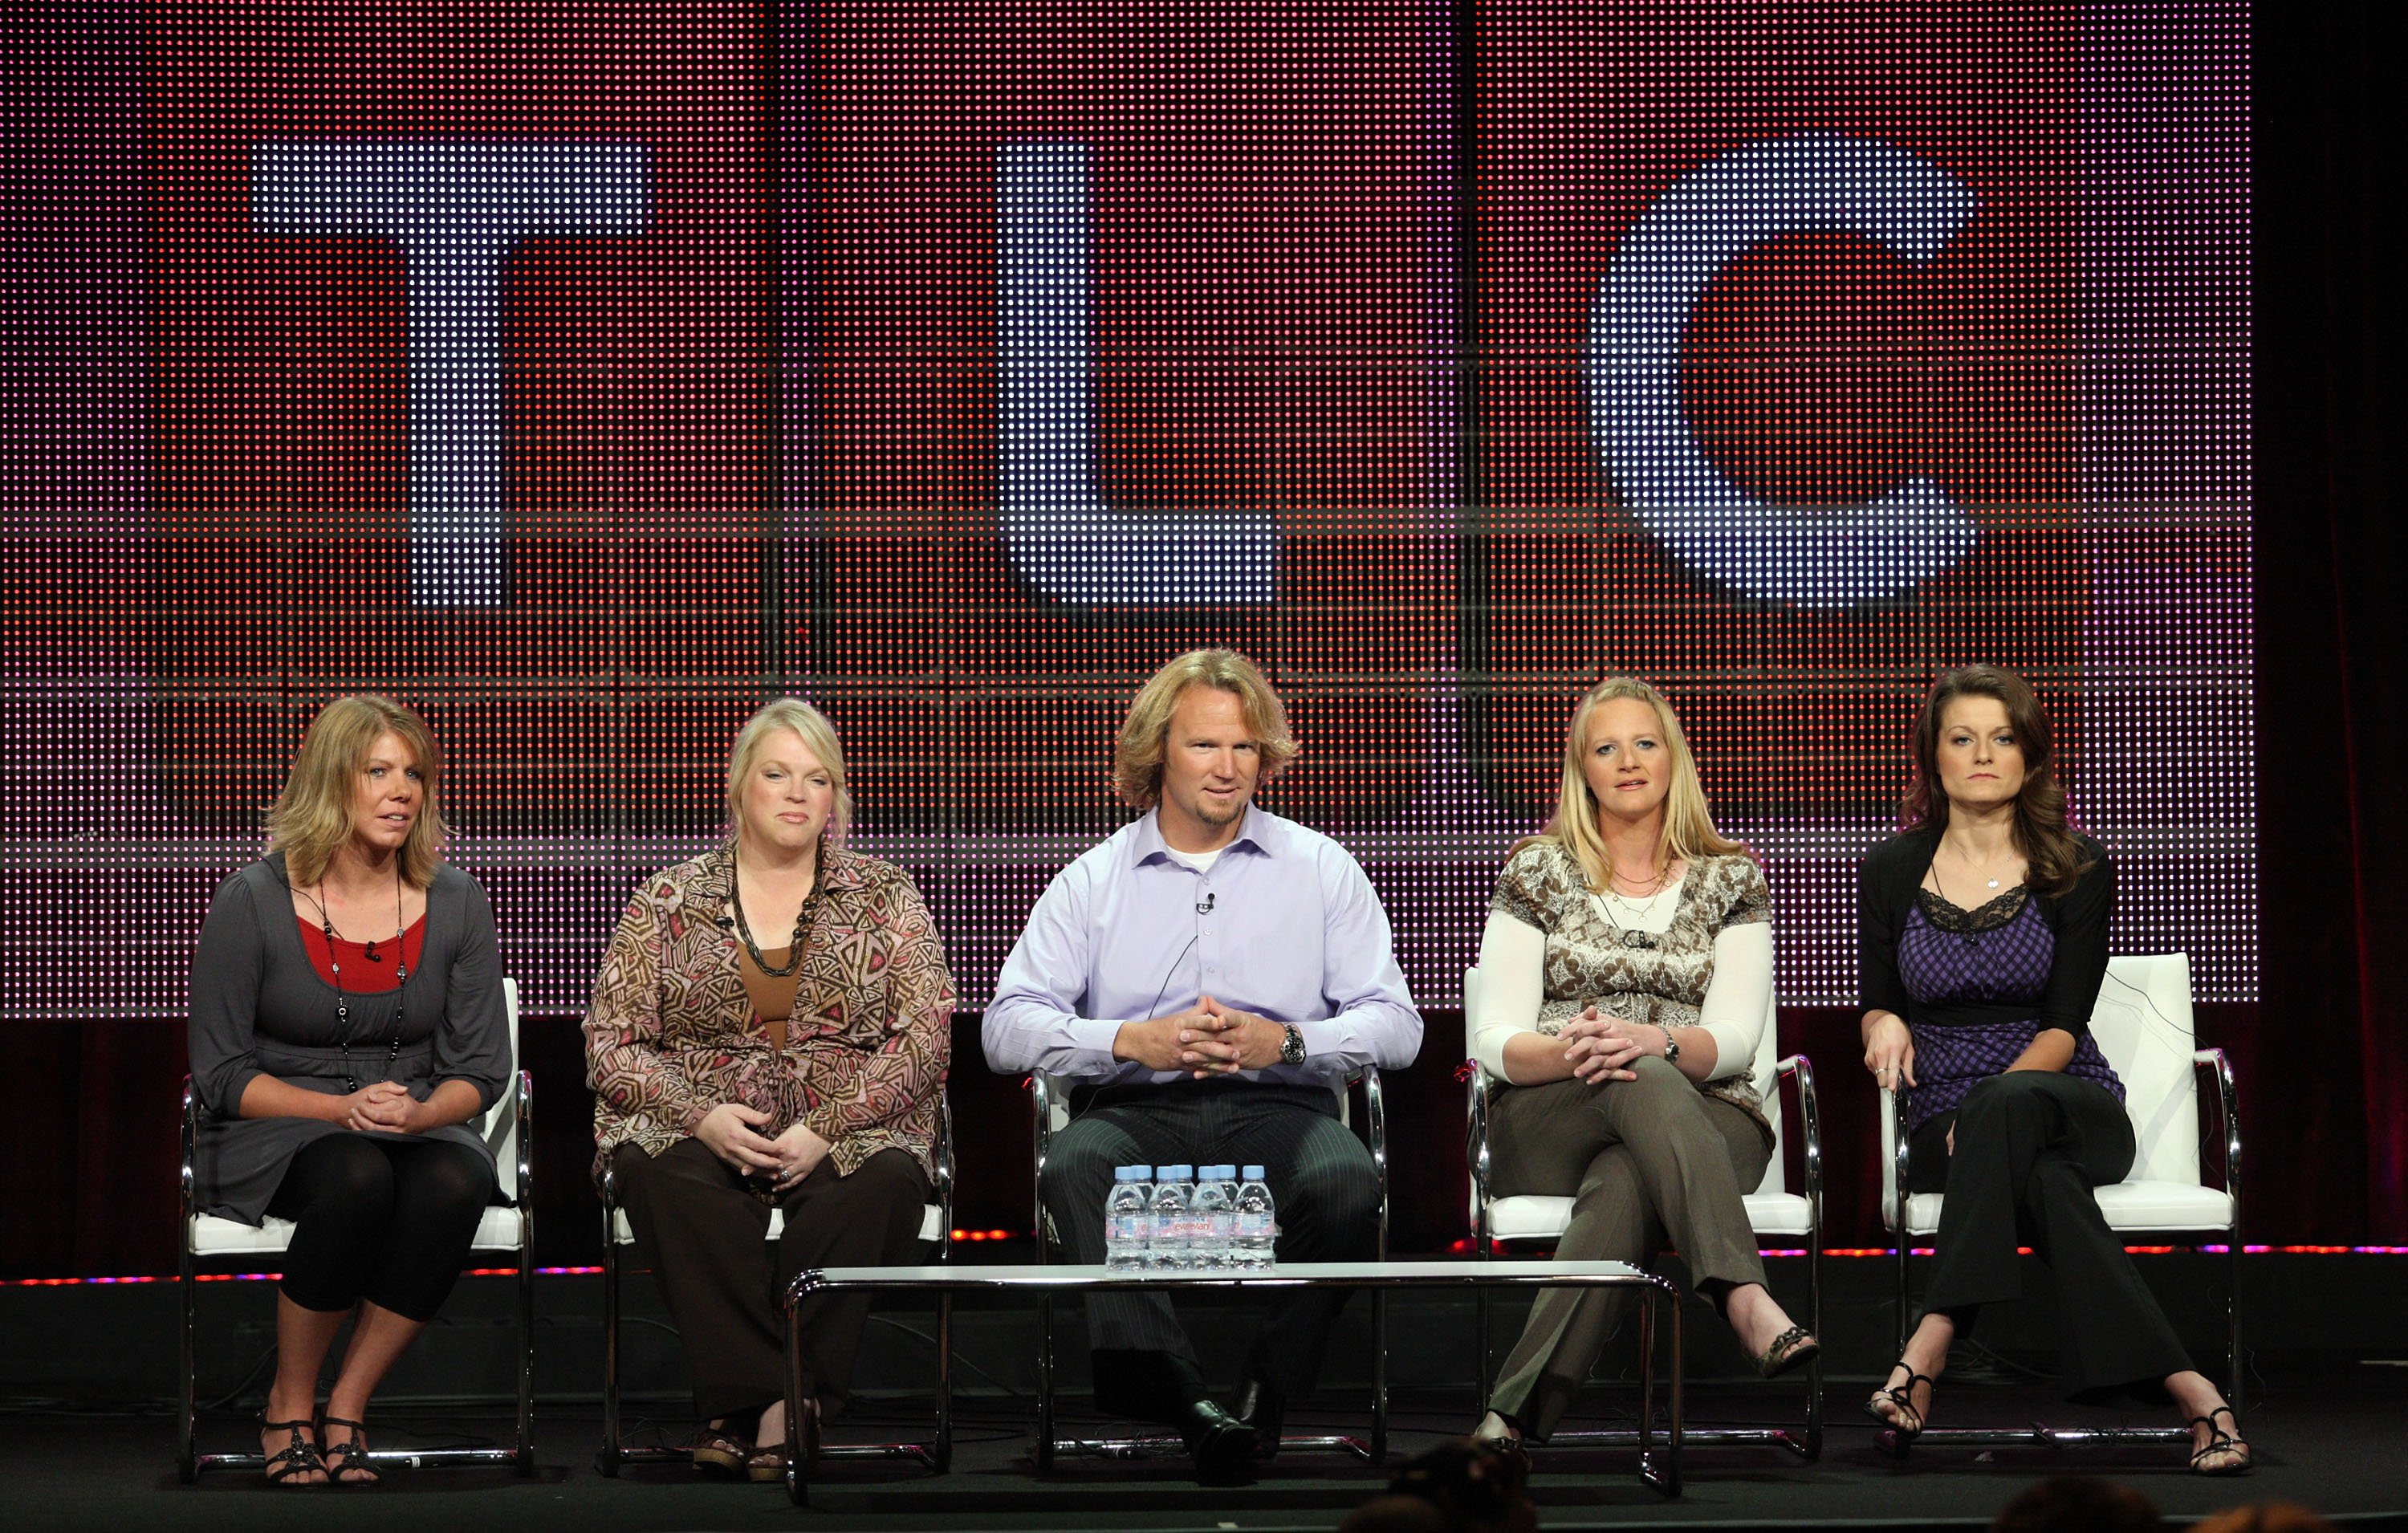 Meri Brown, Janelle Brown, Kody Brown, Christine Brown and Robyn Brown sit on stage in front of the TLC logo during the 2010 Summer TCA Press Tour. 'Sister Wives' fans want a change to the tell-all format